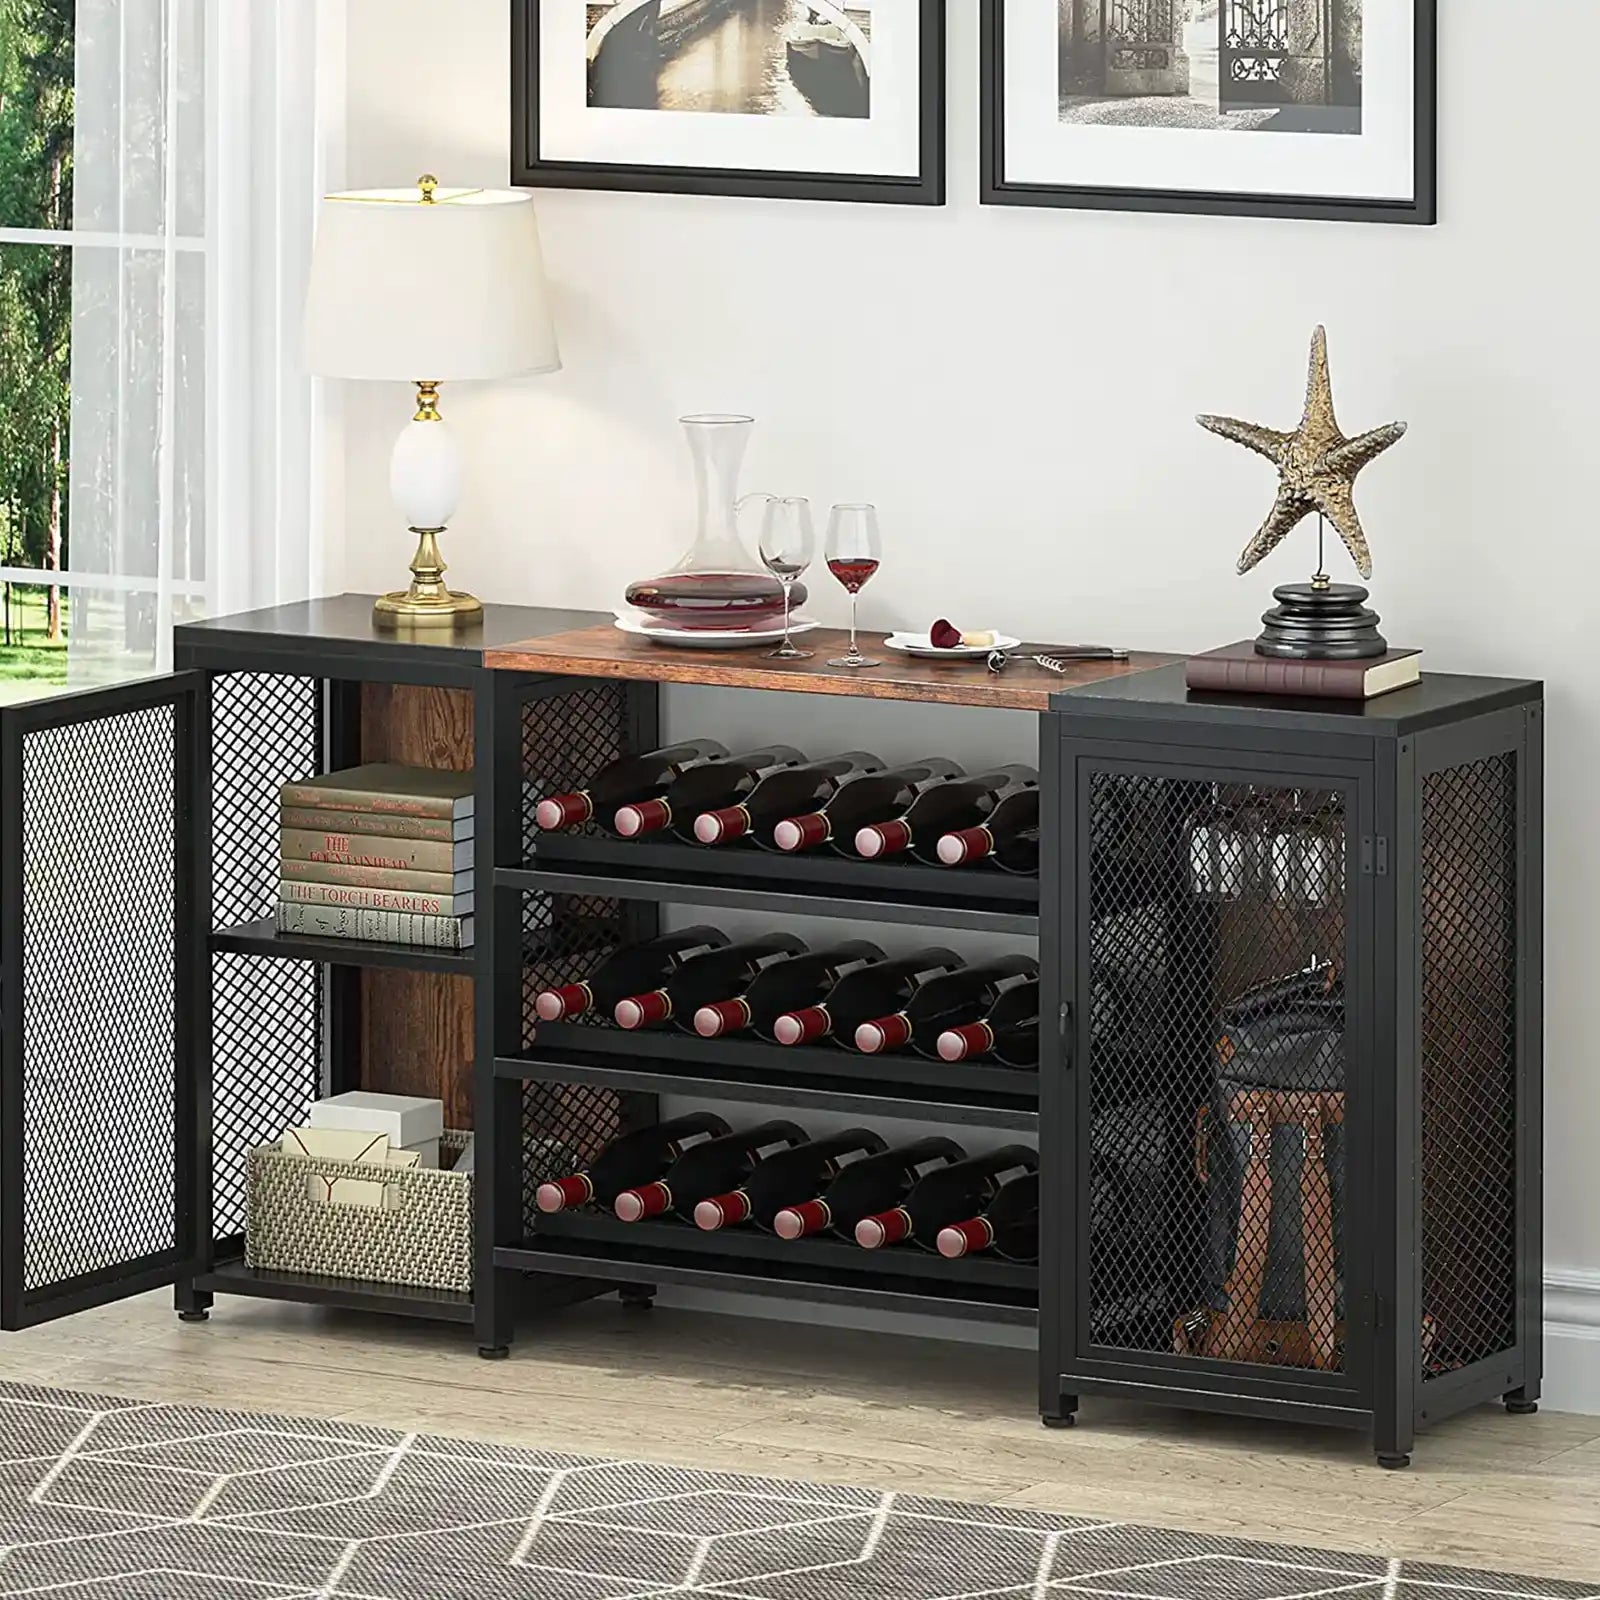 Rustic Wood Bar Cabinet for Liquor and Glasses